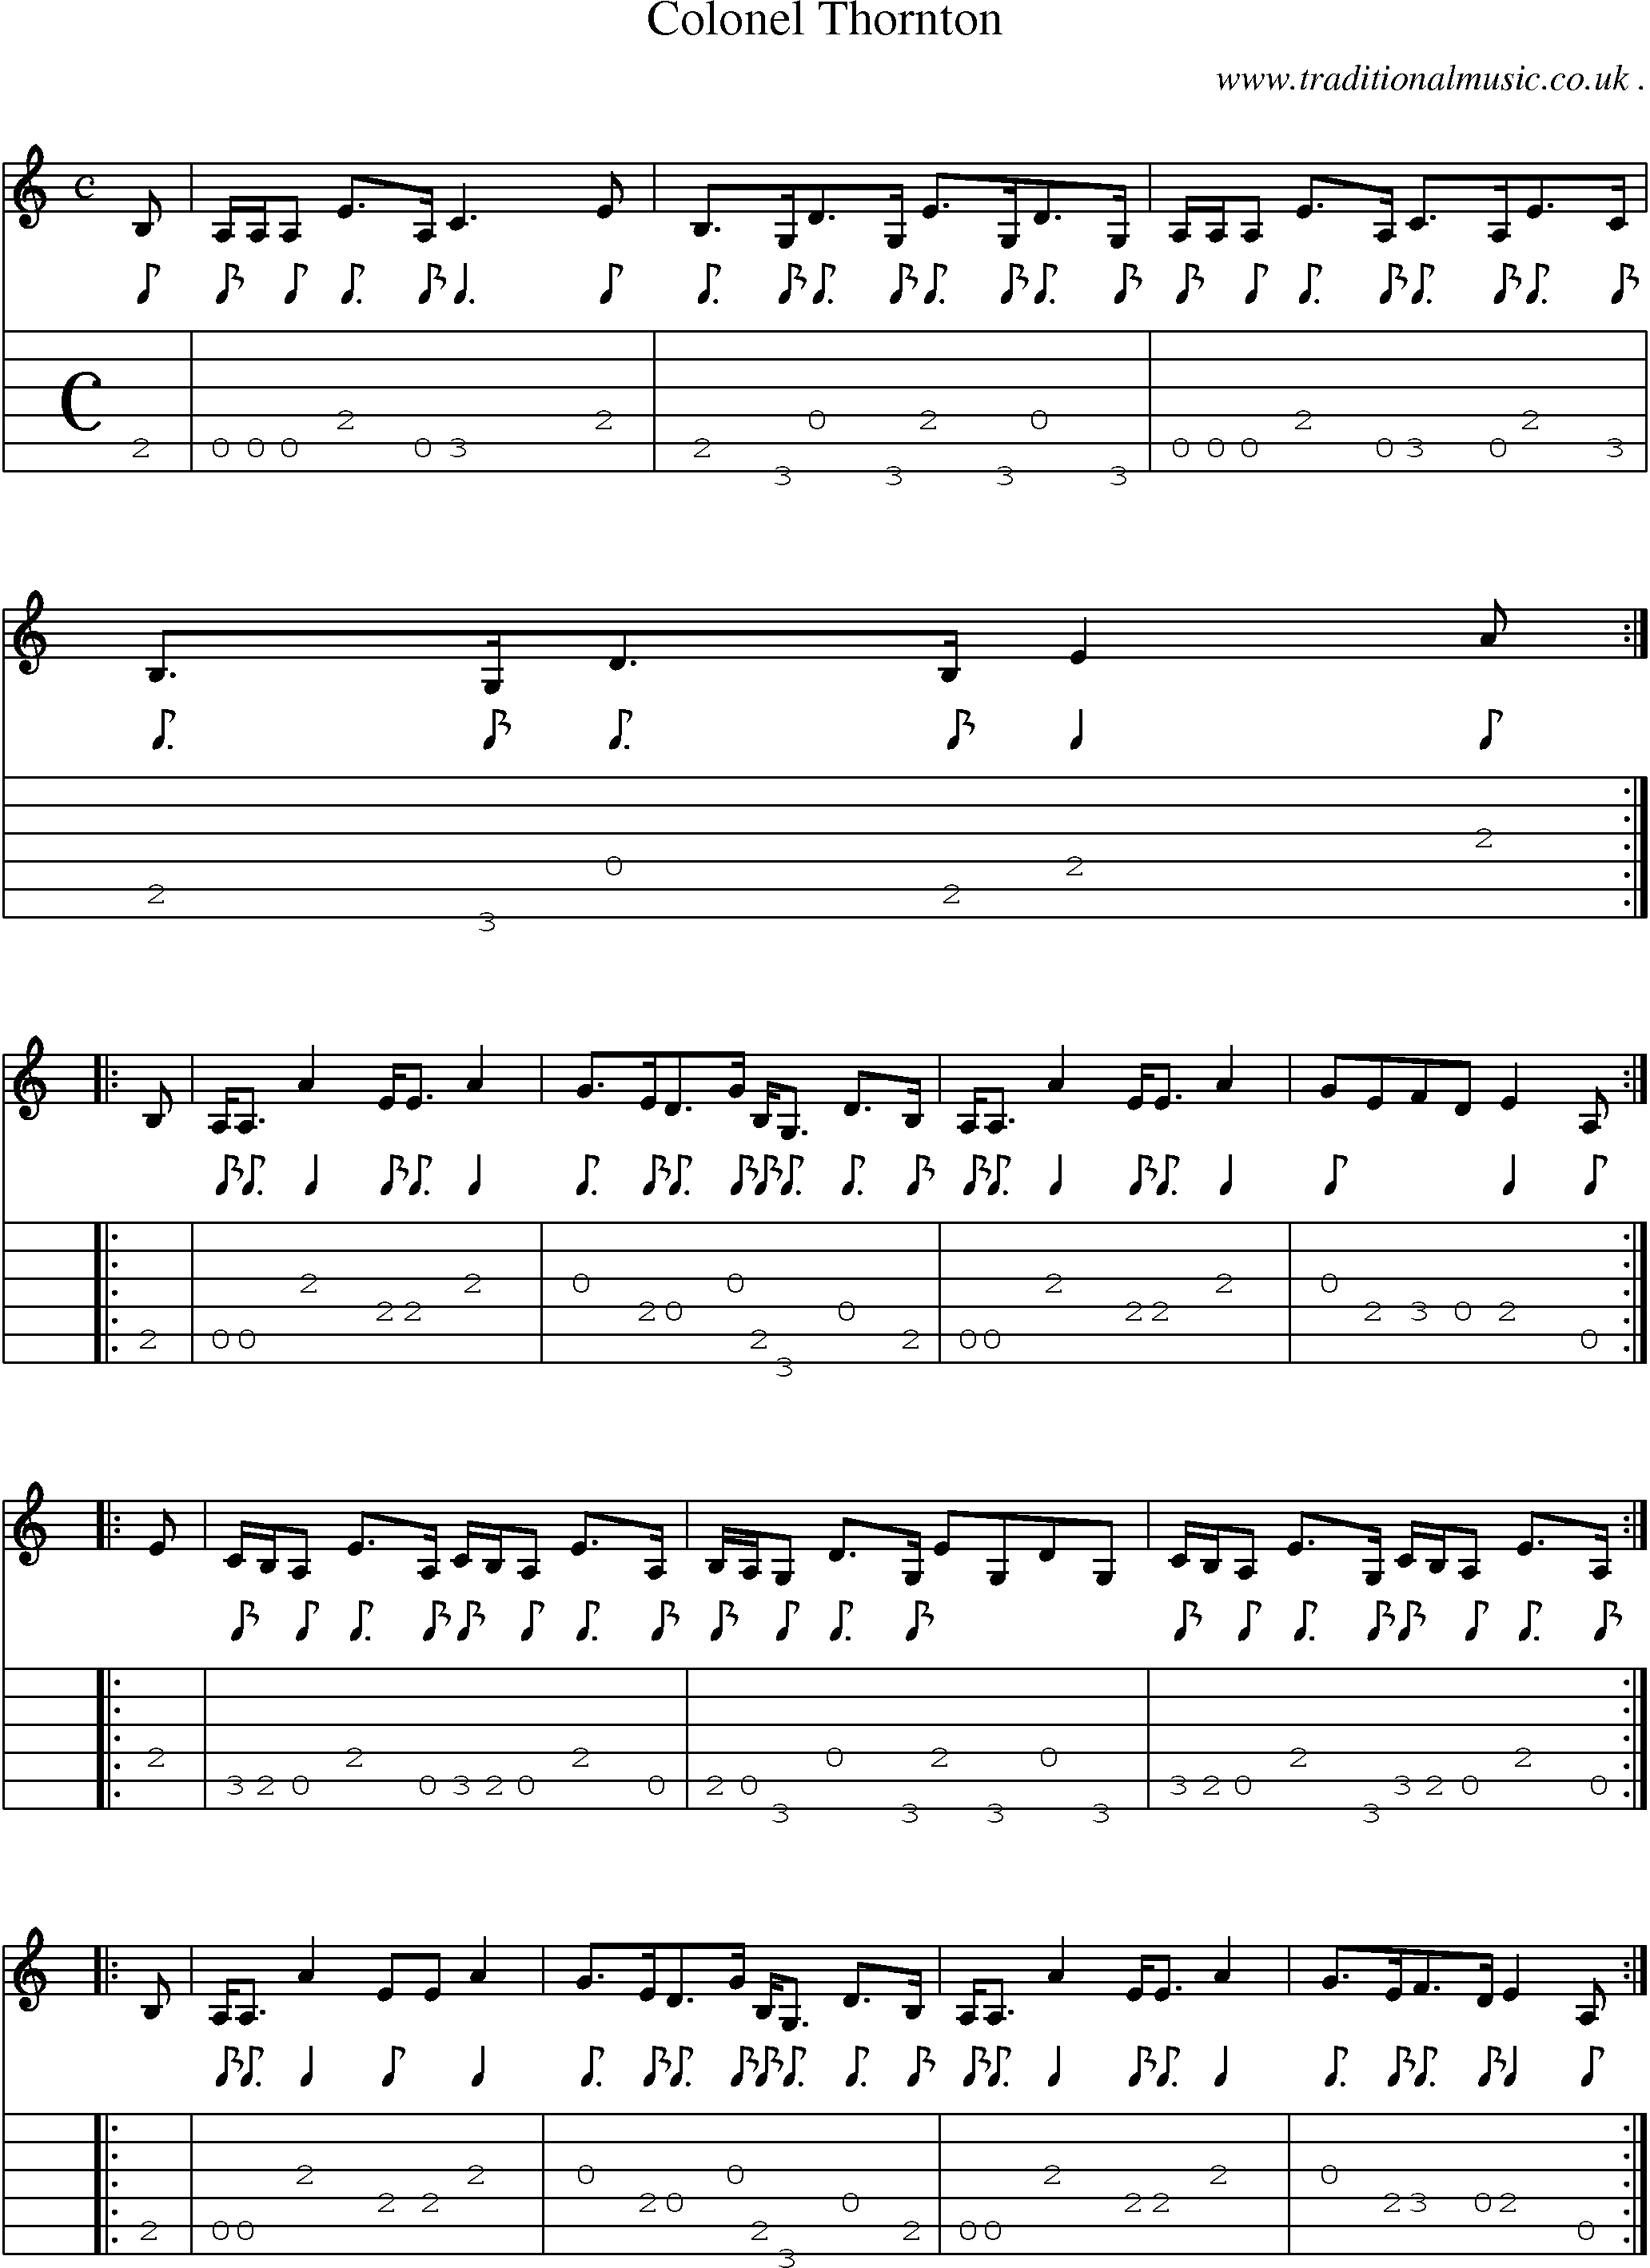 Sheet-music  score, Chords and Guitar Tabs for Colonel Thornton